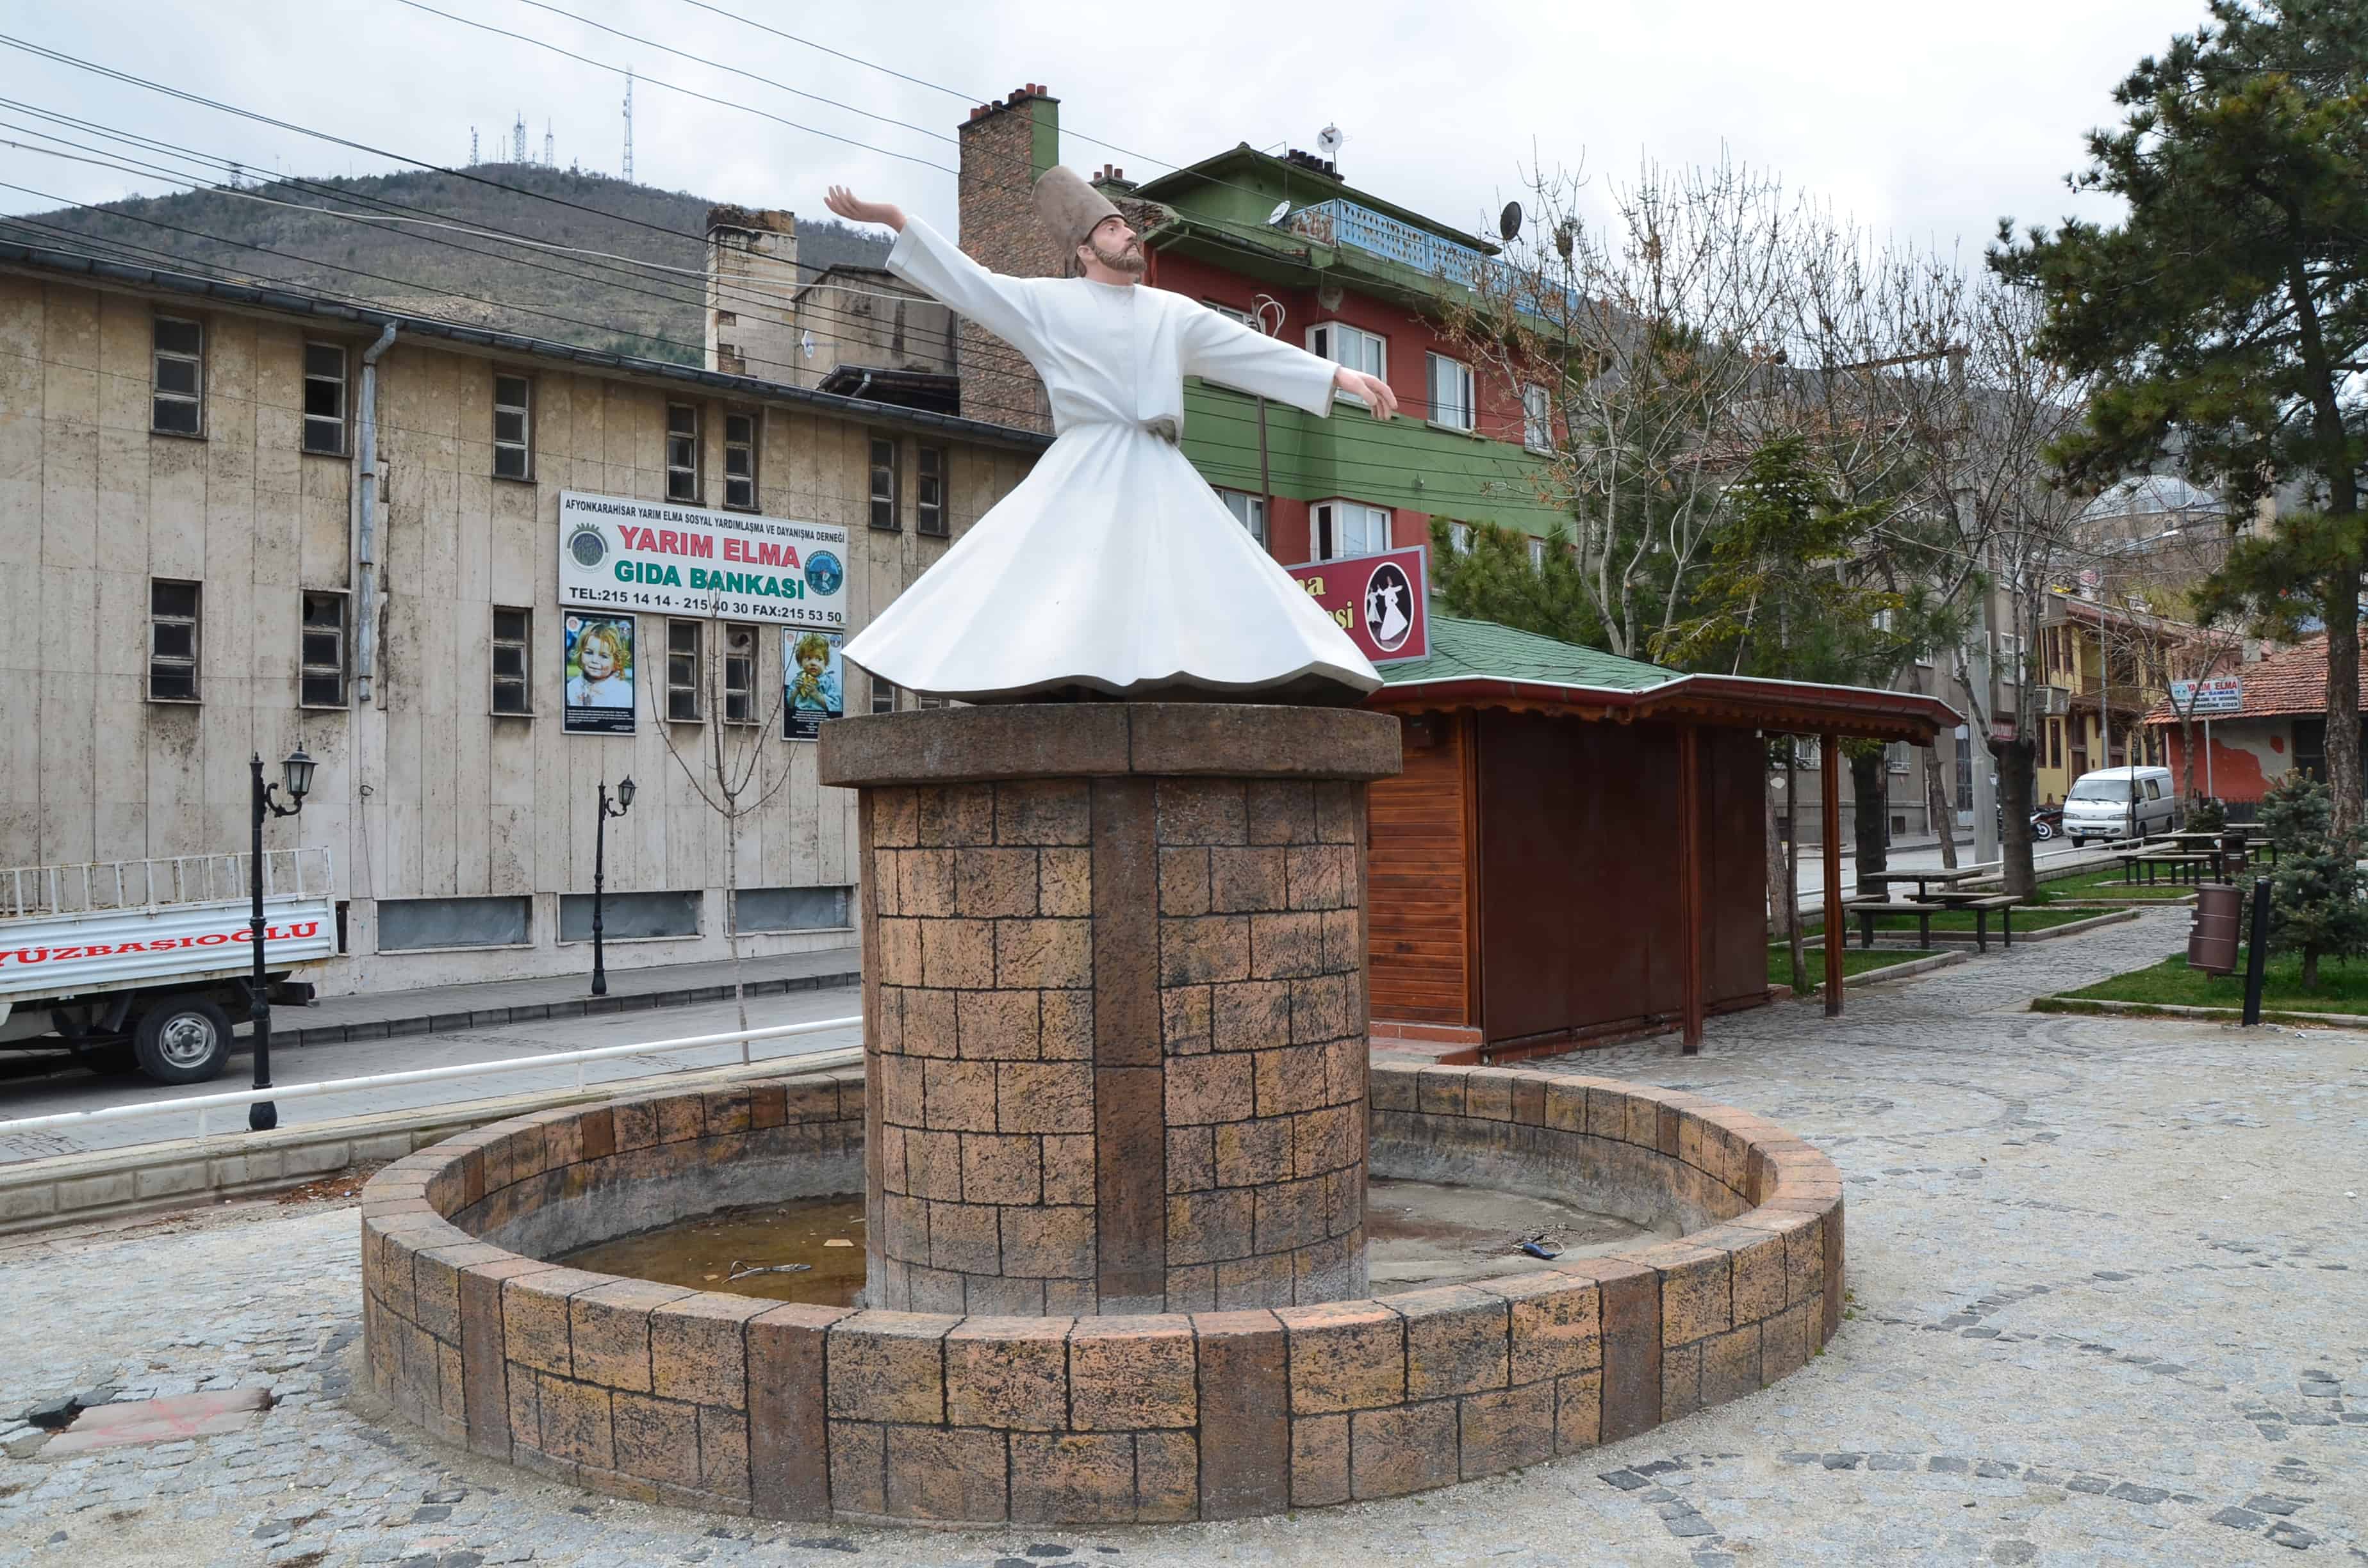 Whirling dervish fountain at the Mevlana Family Tea Garden in Afyon, Turkey